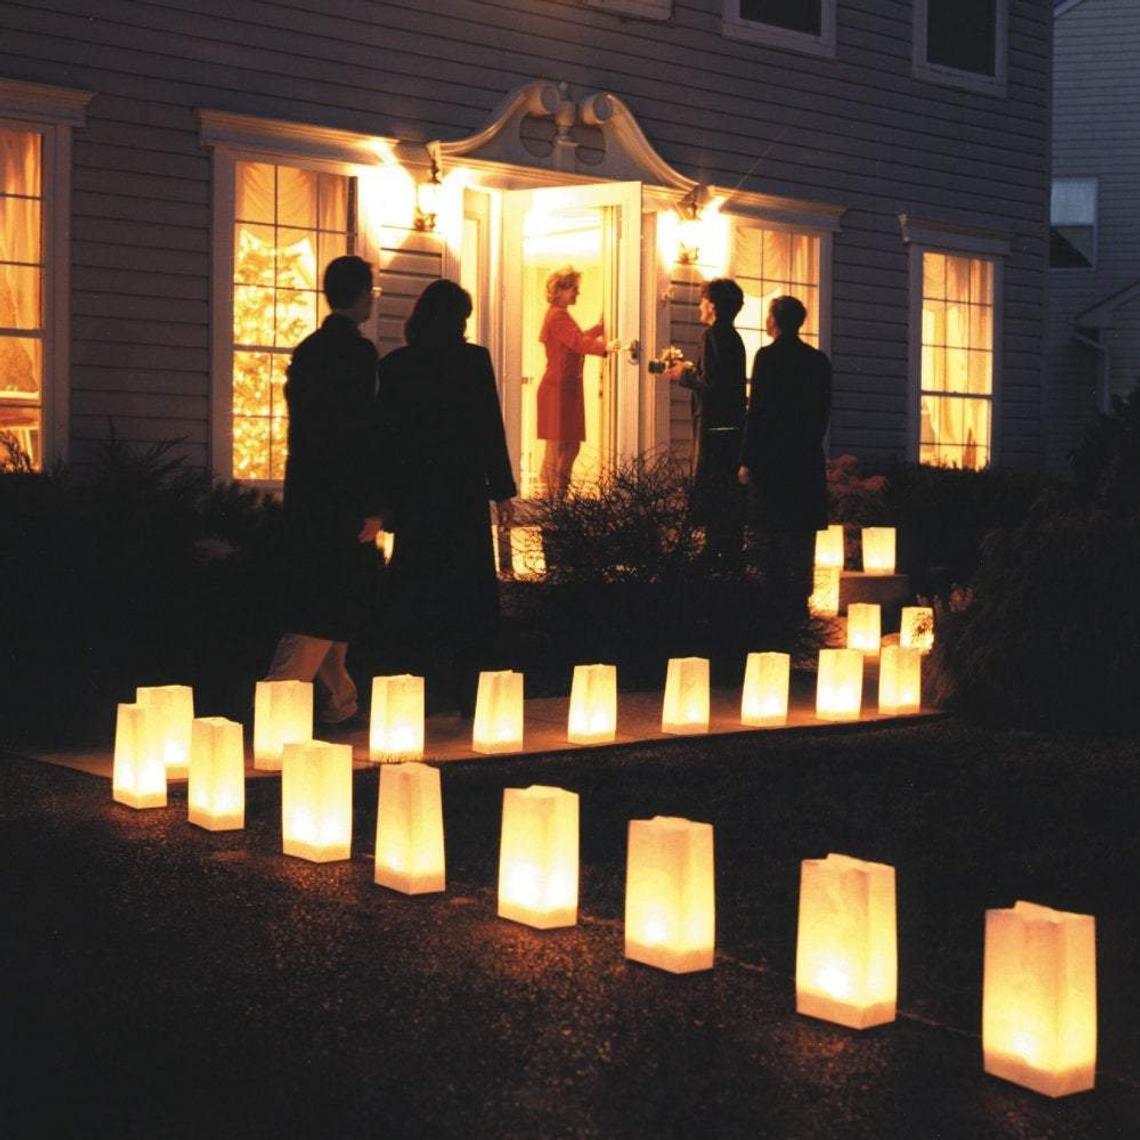 Led Luminaria 50Pc Light Up Luminaries Warm White Luminary Candle Bags With Lights-For Wedding Aisle, Rustic Wedding Decorations - If you say i do